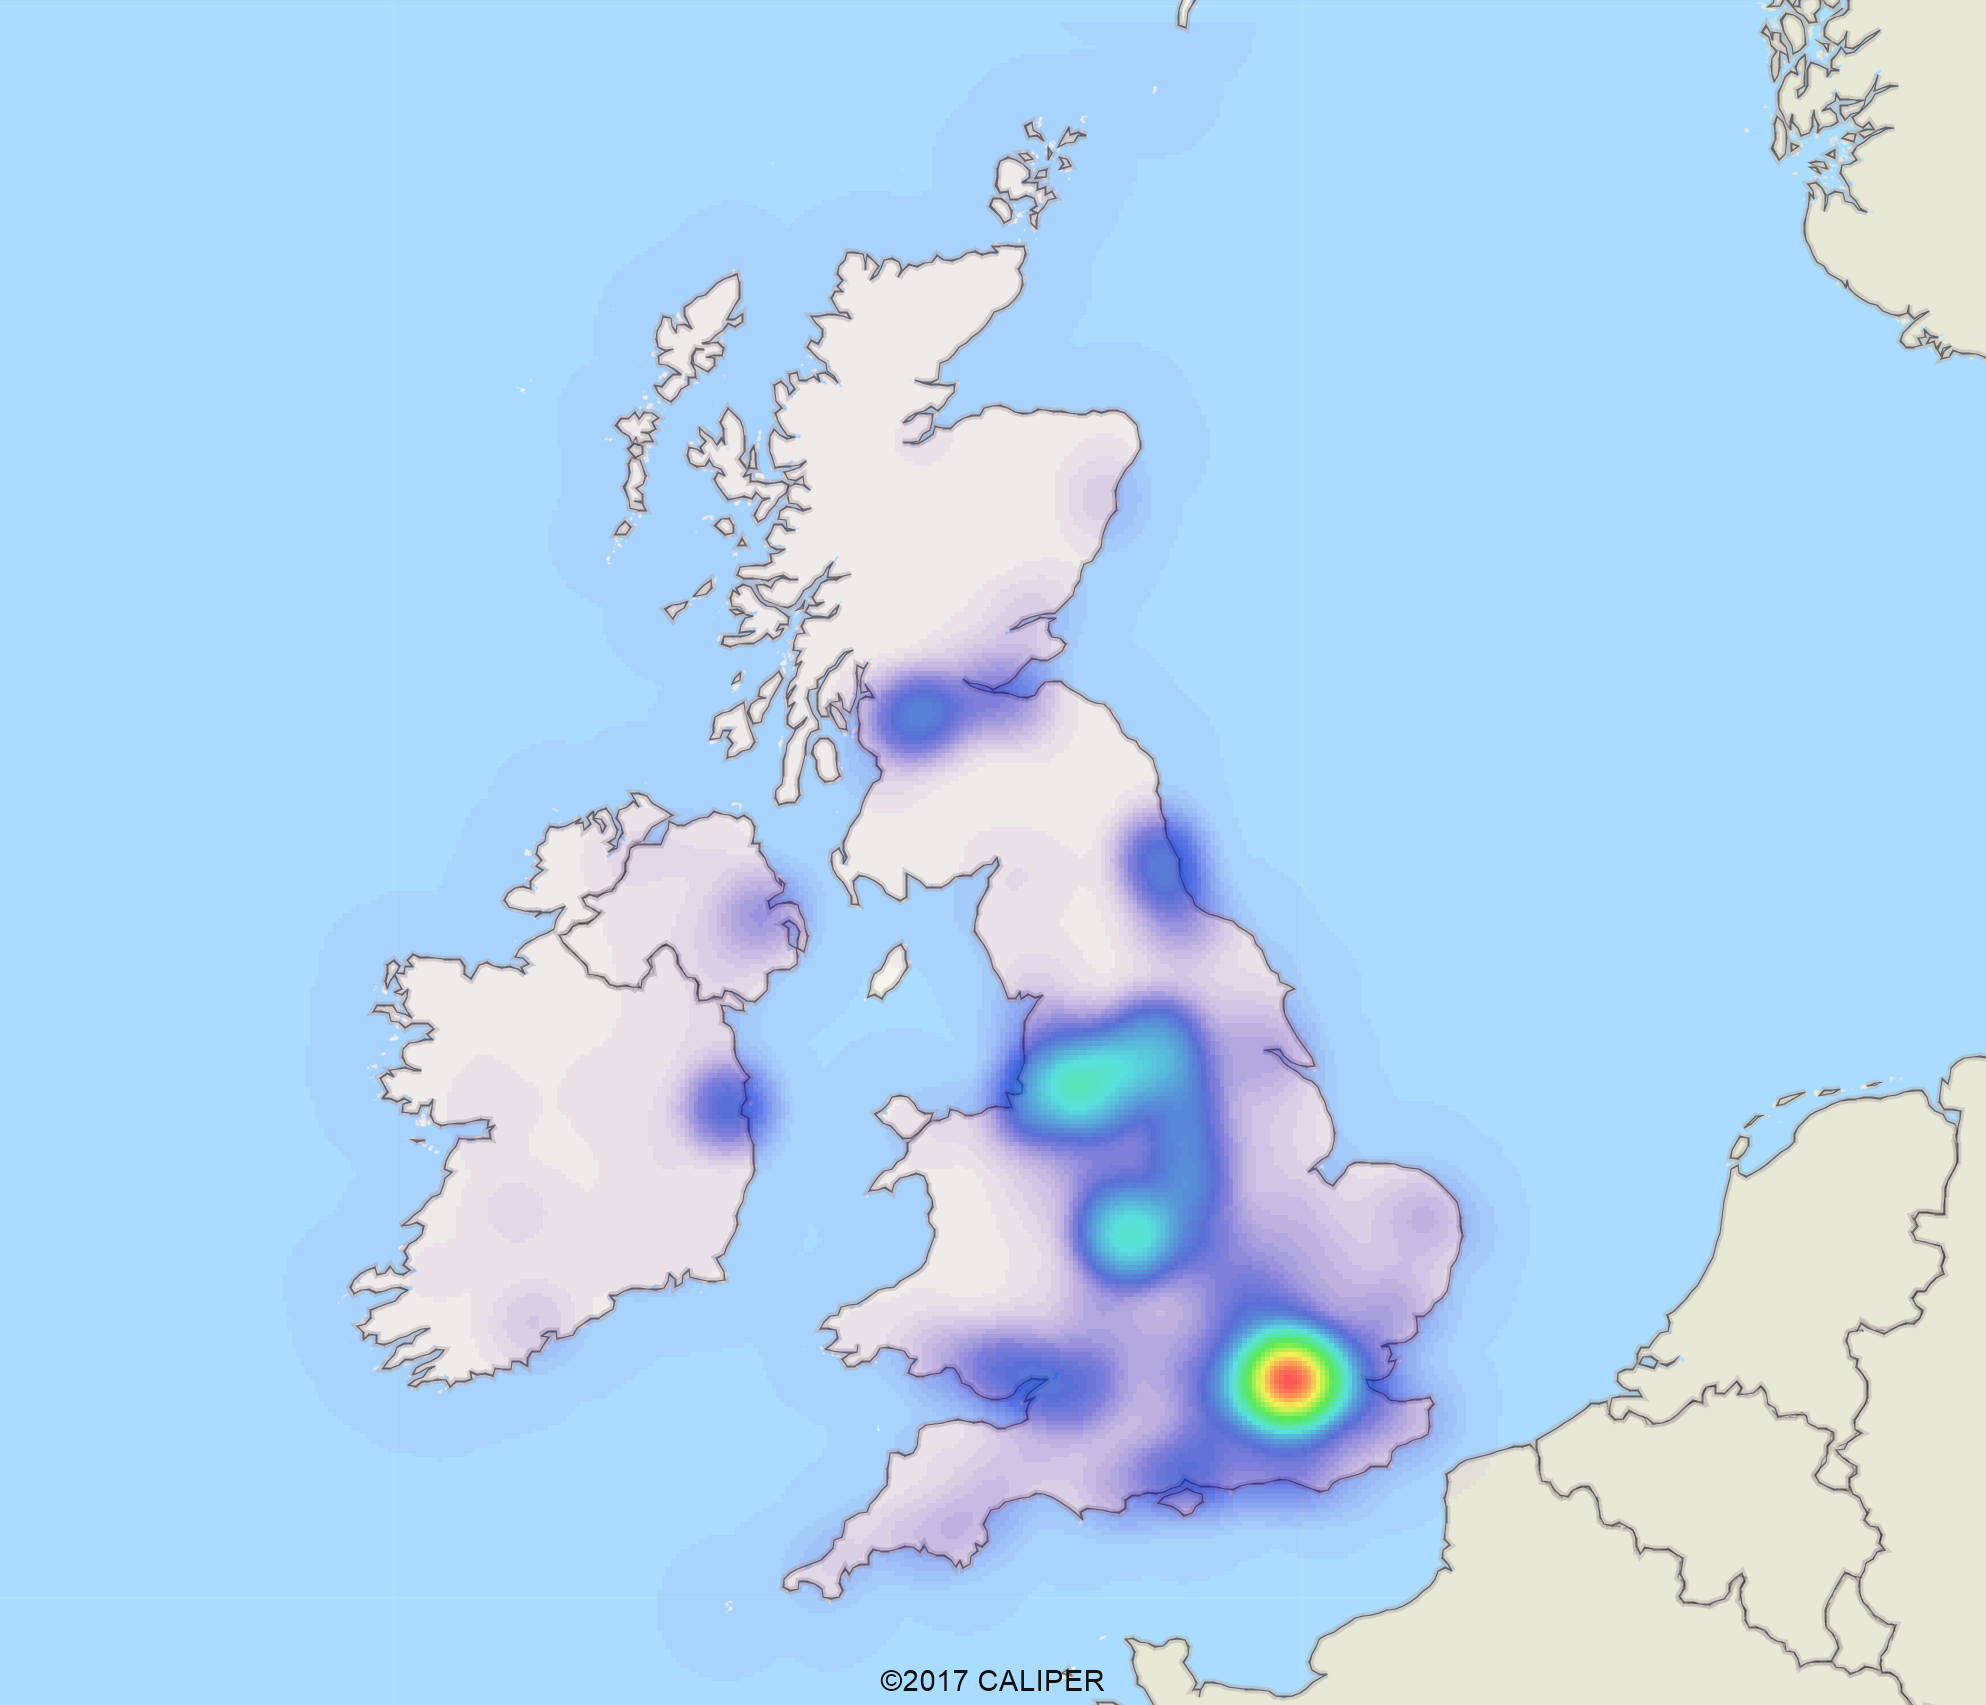 Aricia Update - HS2 - Northern Powerhouse - Maptitude - Mapping - GIS - demographics - heatmap